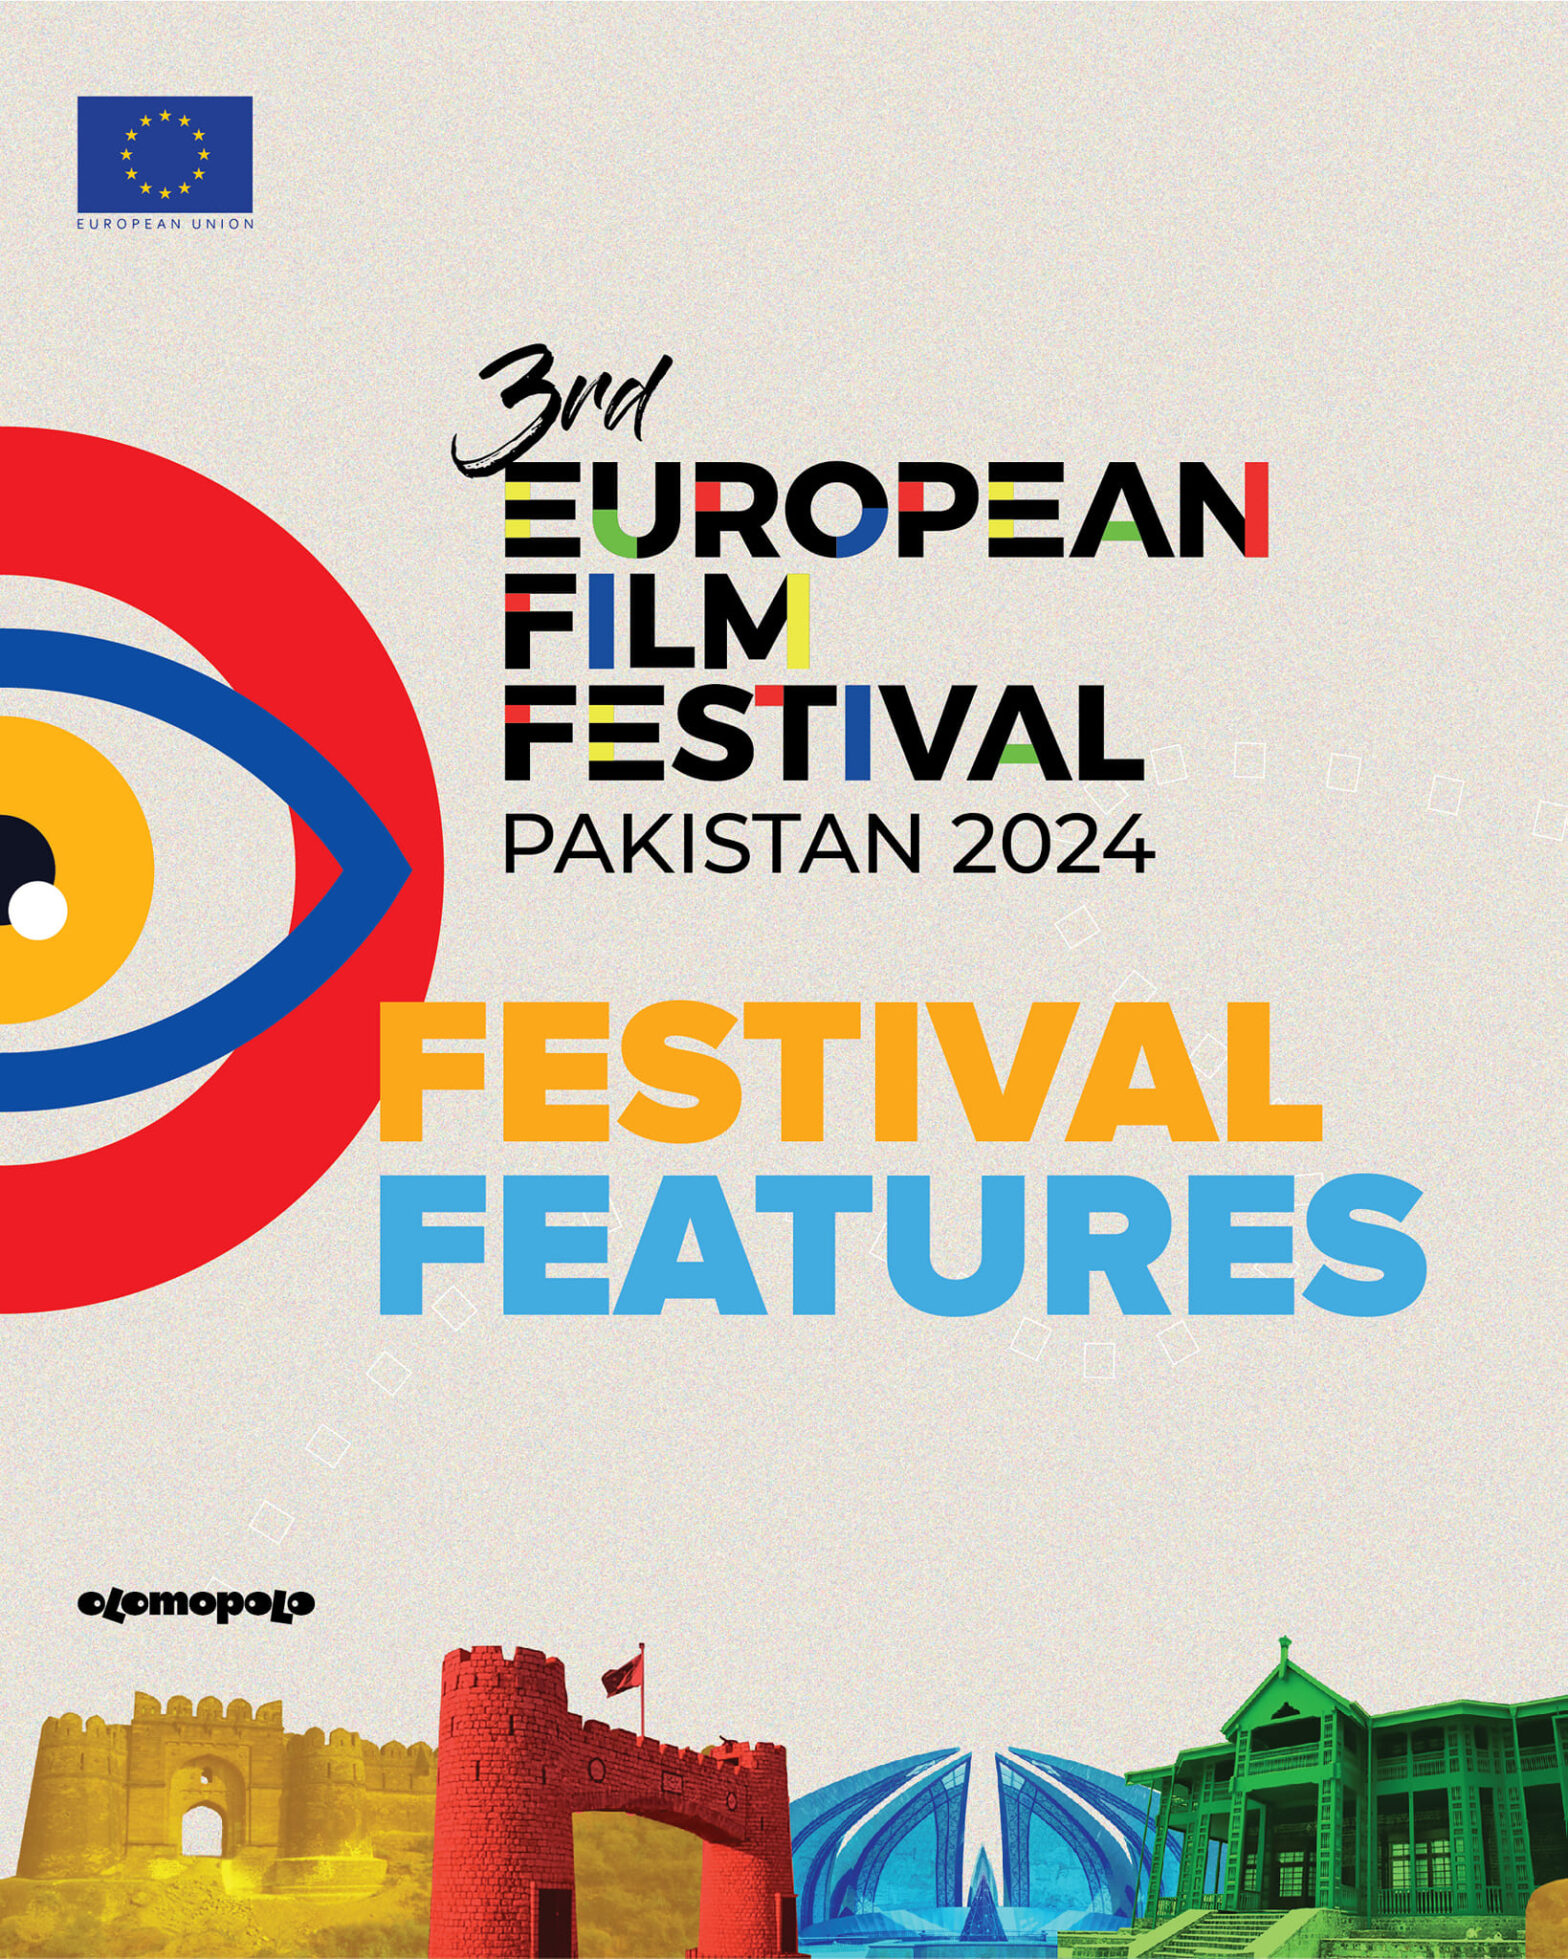 European Film Festival to start from May 15, featuring an exciting fusion of cinema